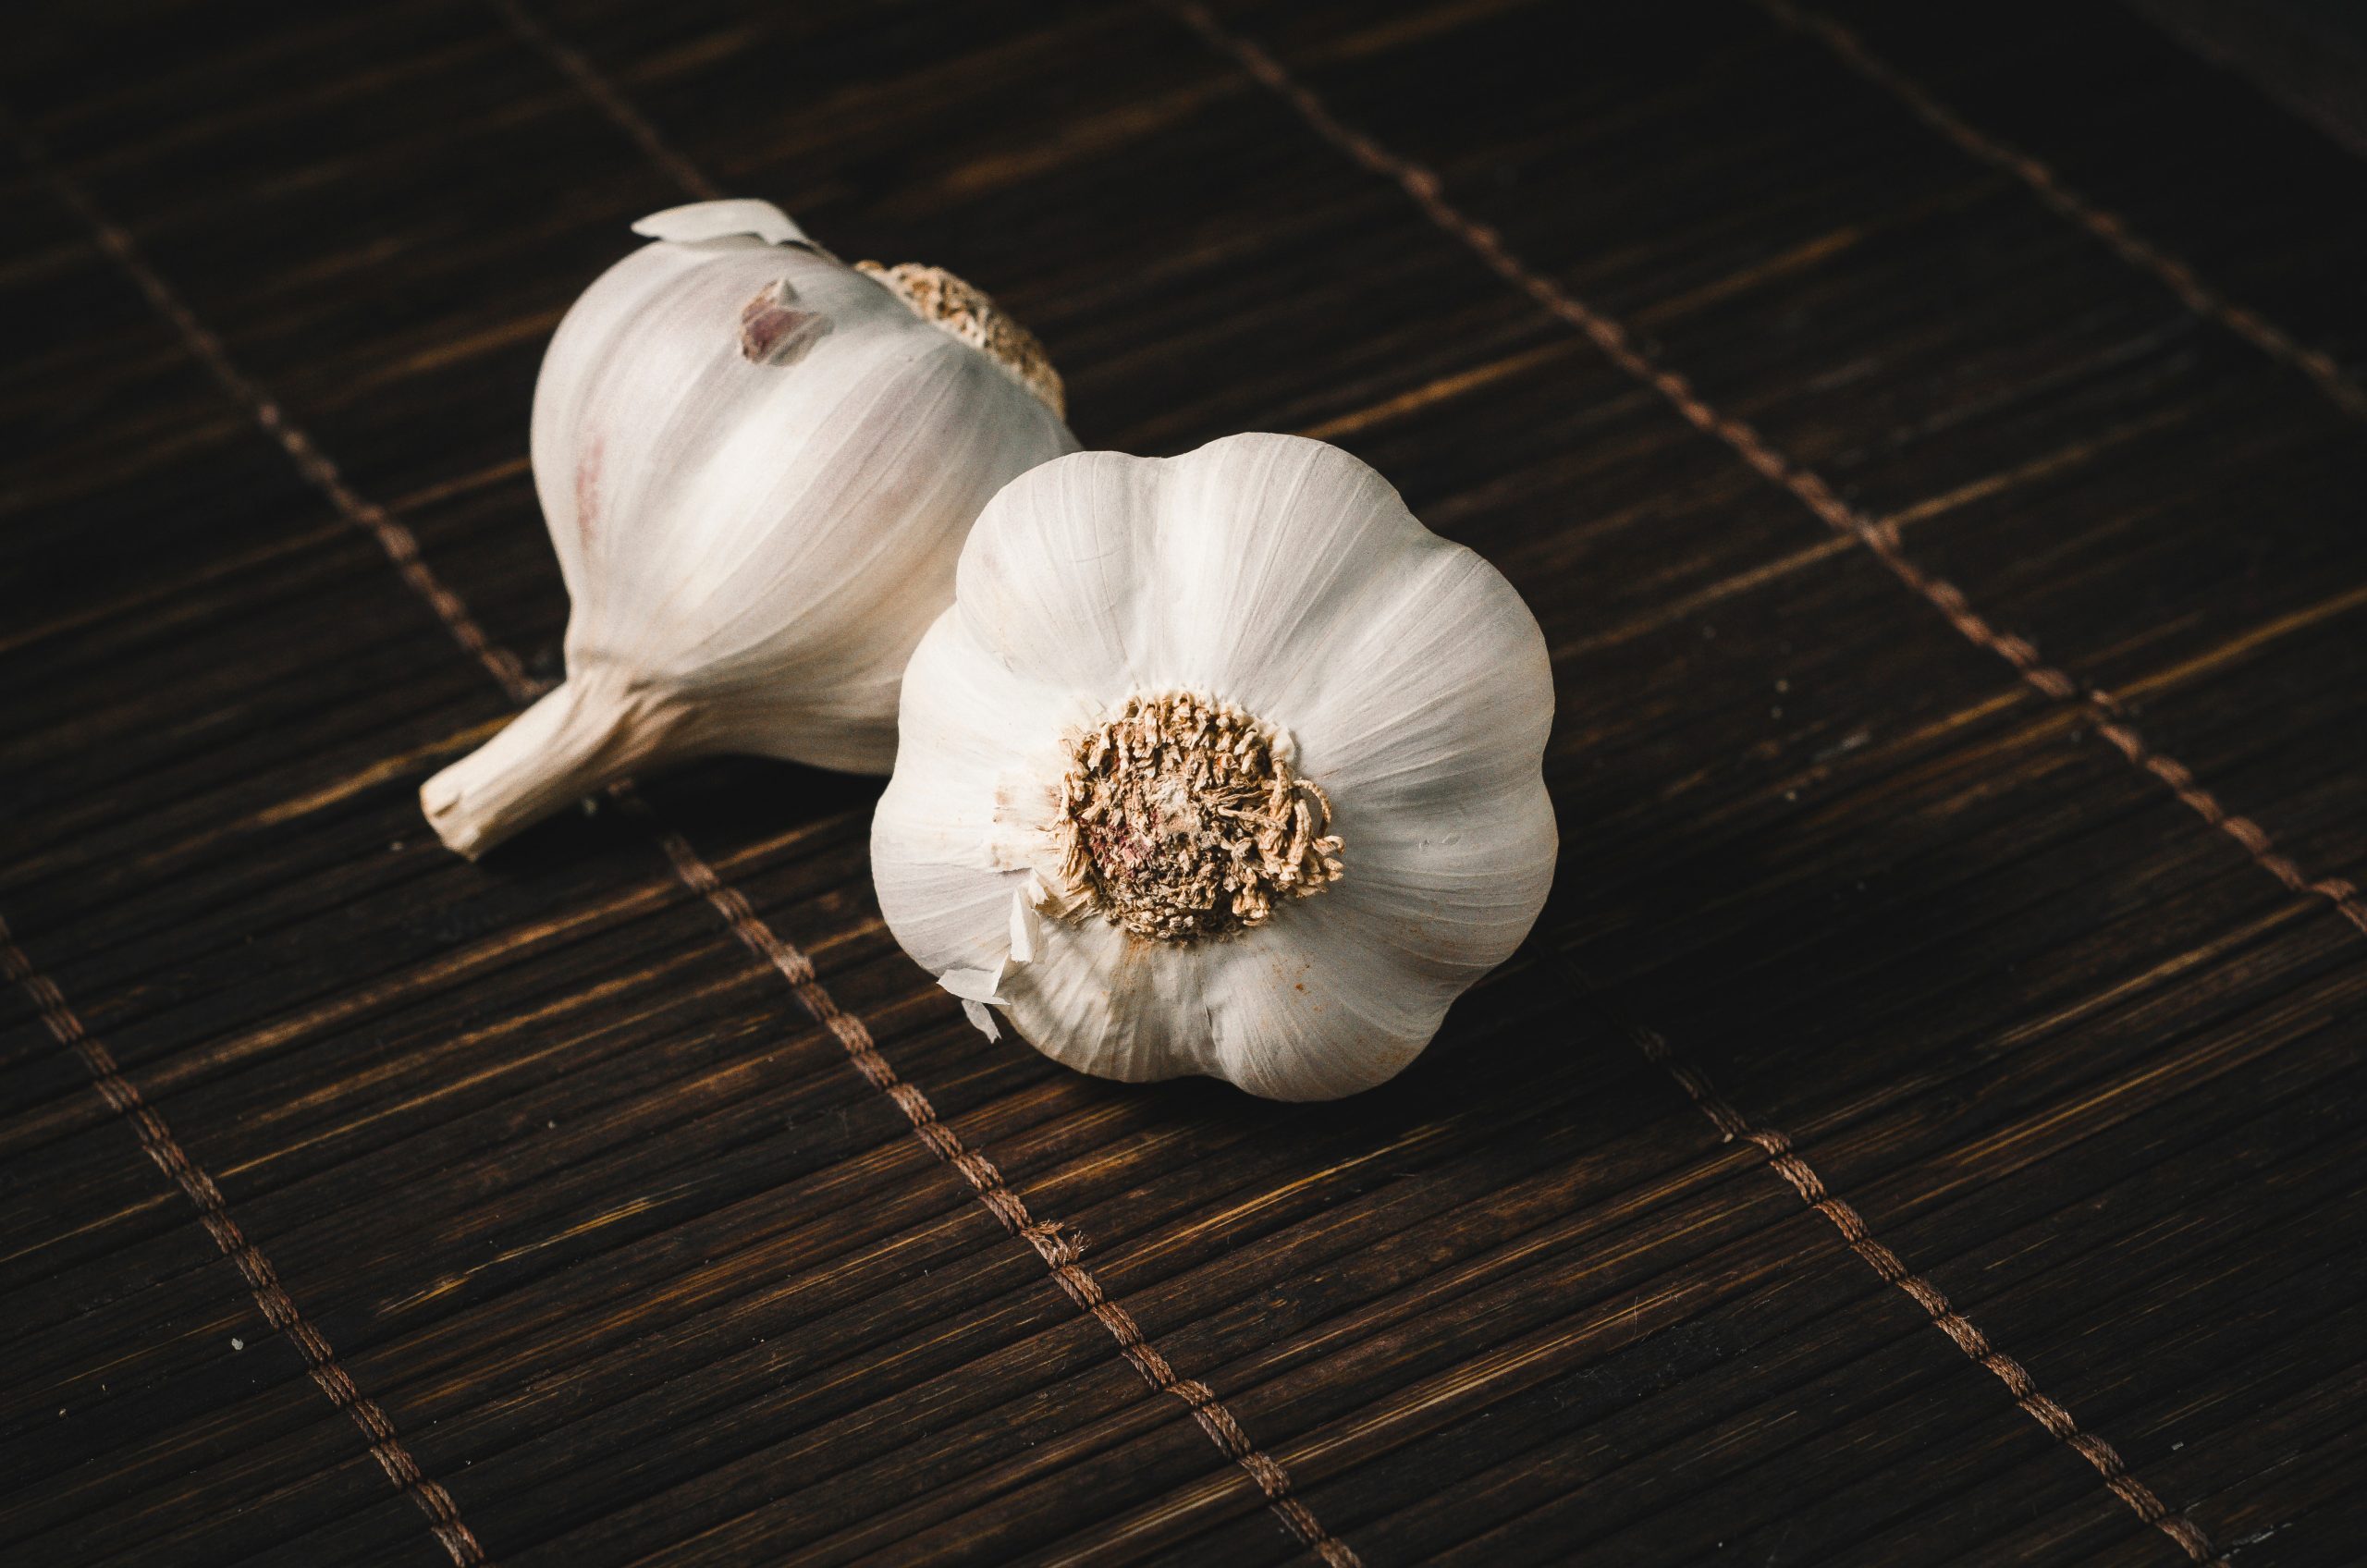 The Healing Spice of Caribbean Culture – Garlic